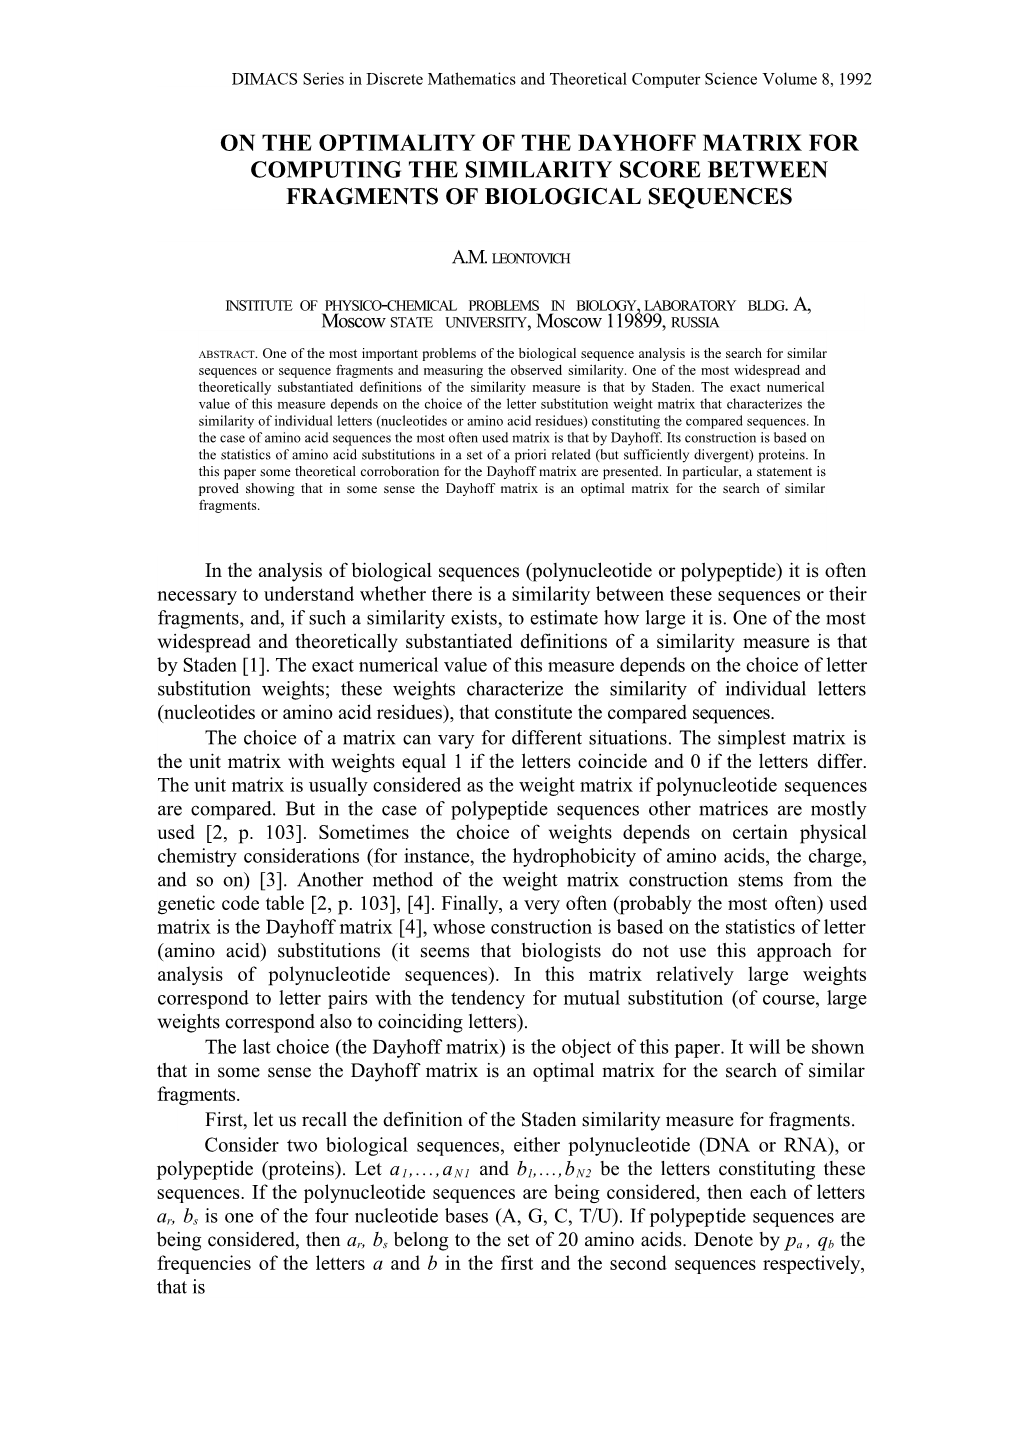 DIMACS Series in Discrete Mathematics and Theoretical Computer Science Volume 8, 1992